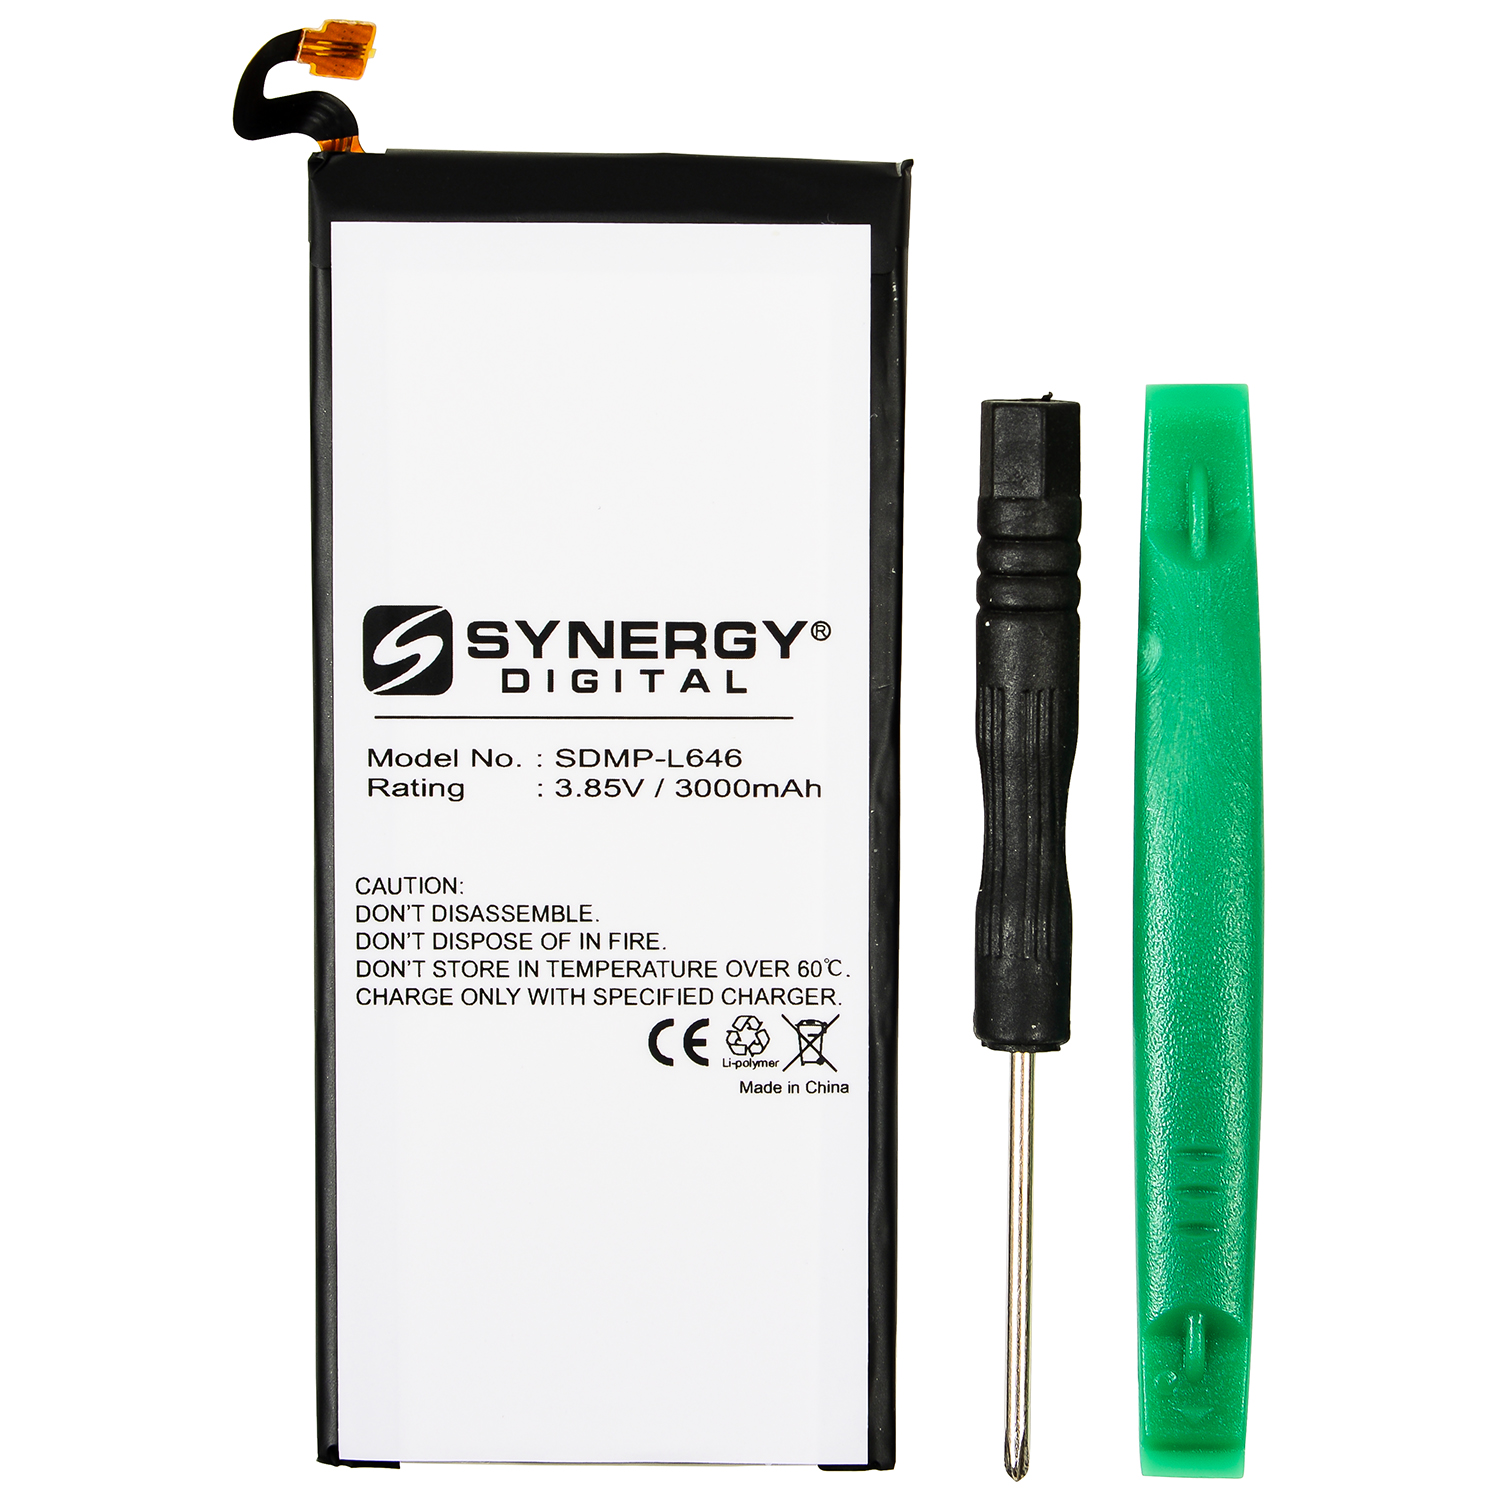 SDMP-P646 Ultra High Capacity (Li-Pol 3.85V 3000mAh) Battery - Replacement For Samsung EB-BG928ABE Cellphone Battery - Installation tools included